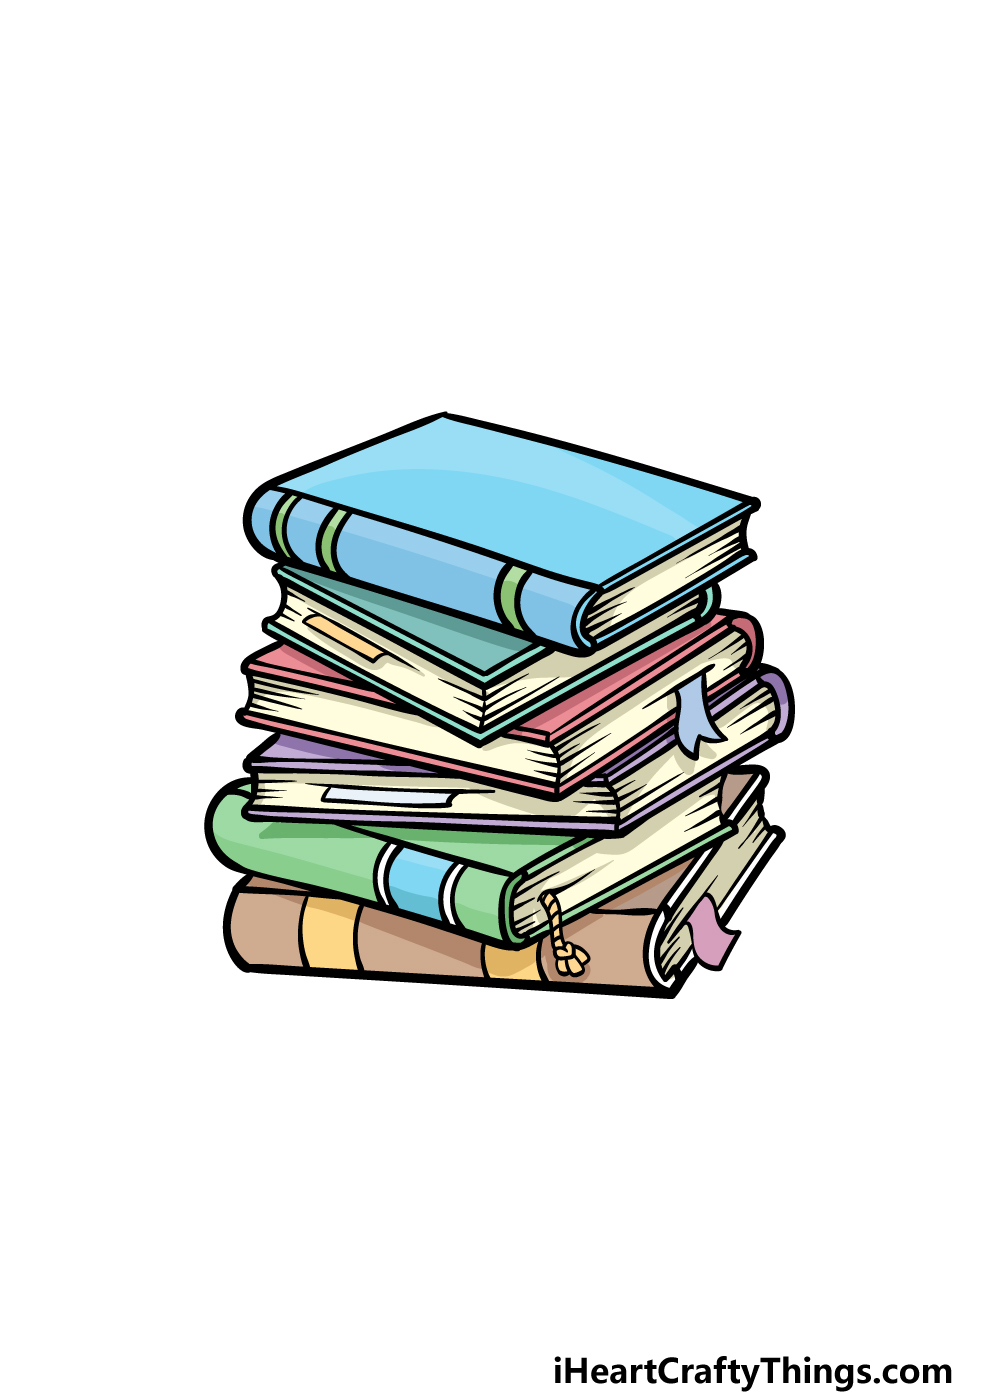 Stack Of Books Drawing - How To Draw A Stack Of Books Step By Step